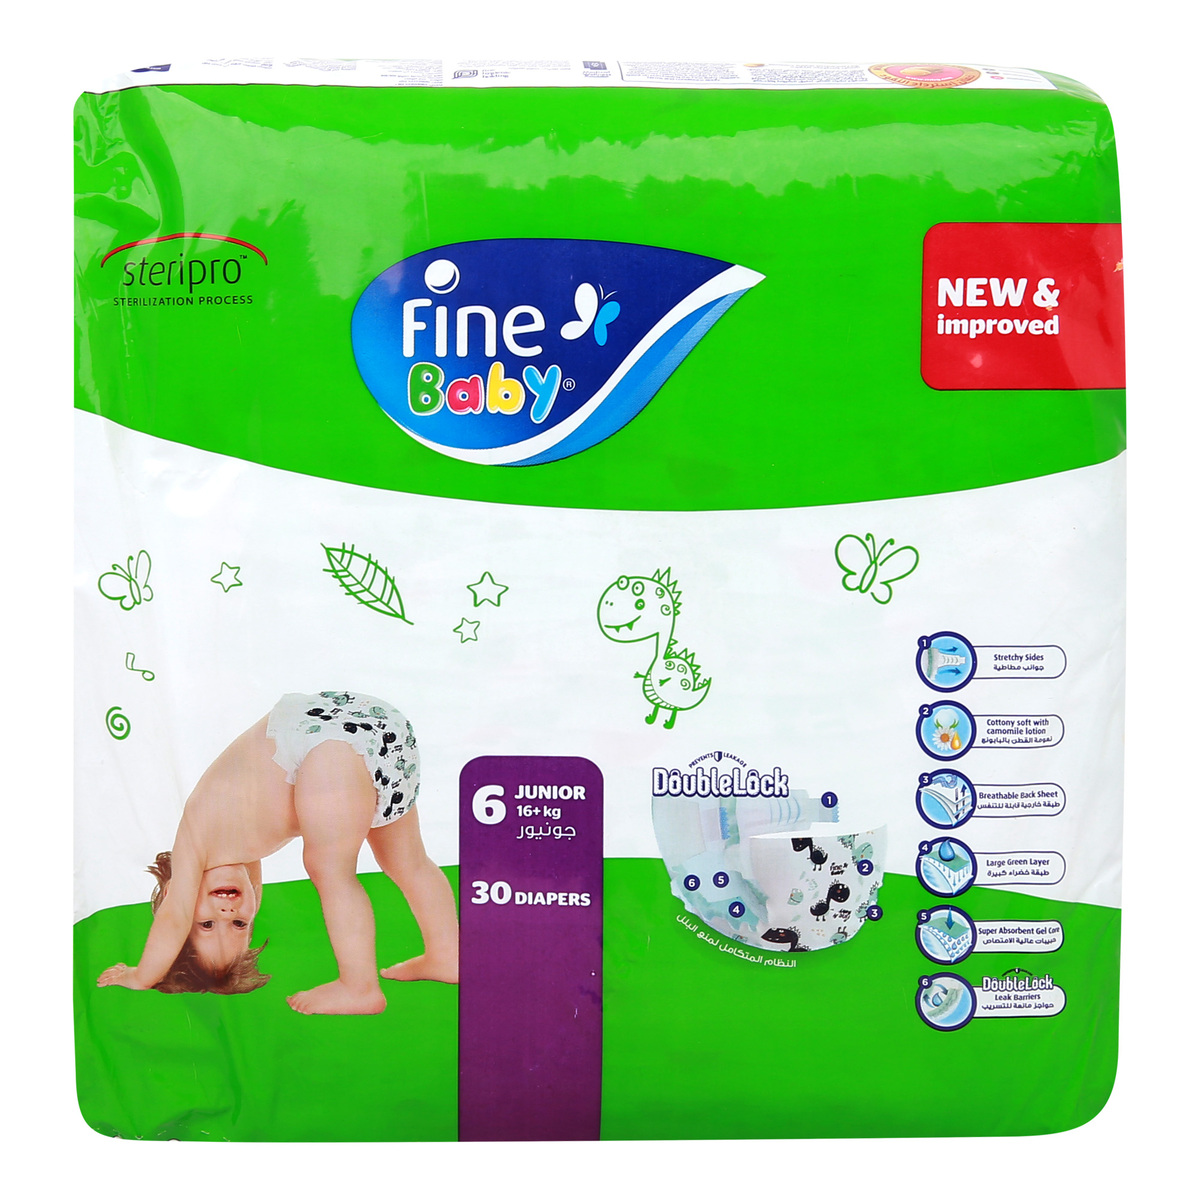 Fine Baby Baby Diapers Size 6 Junior 16+kg 30 pcs